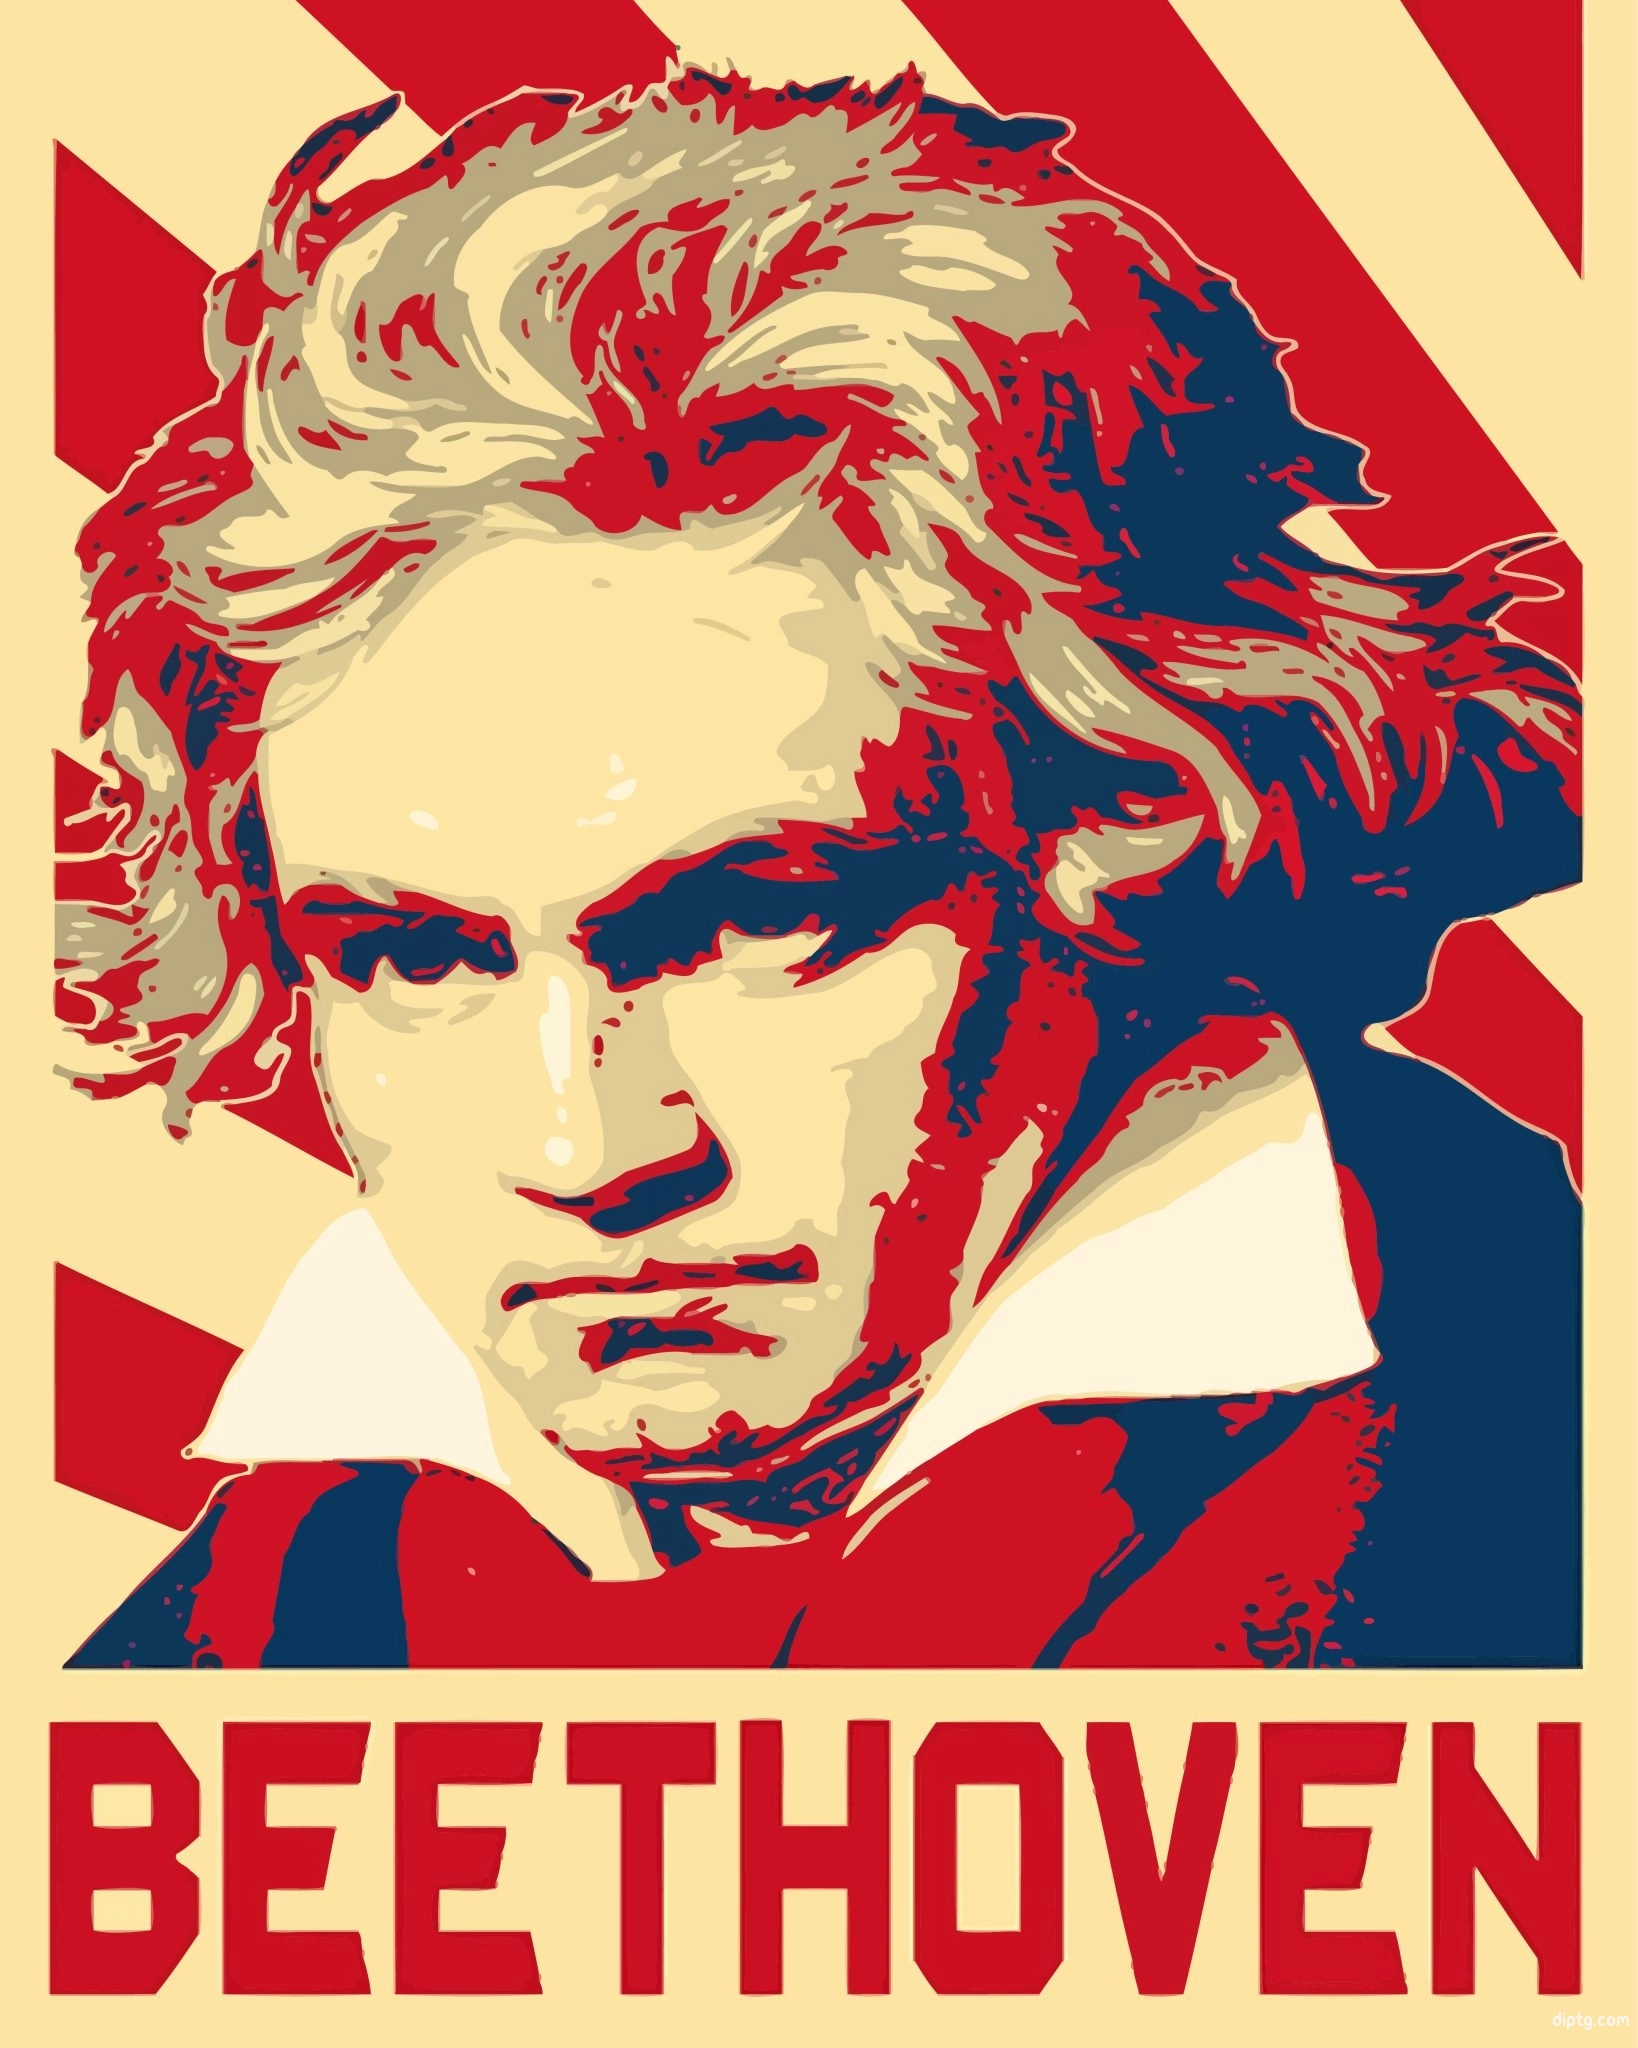 Illustration Beethoven Painting By Numbers Kits.jpg